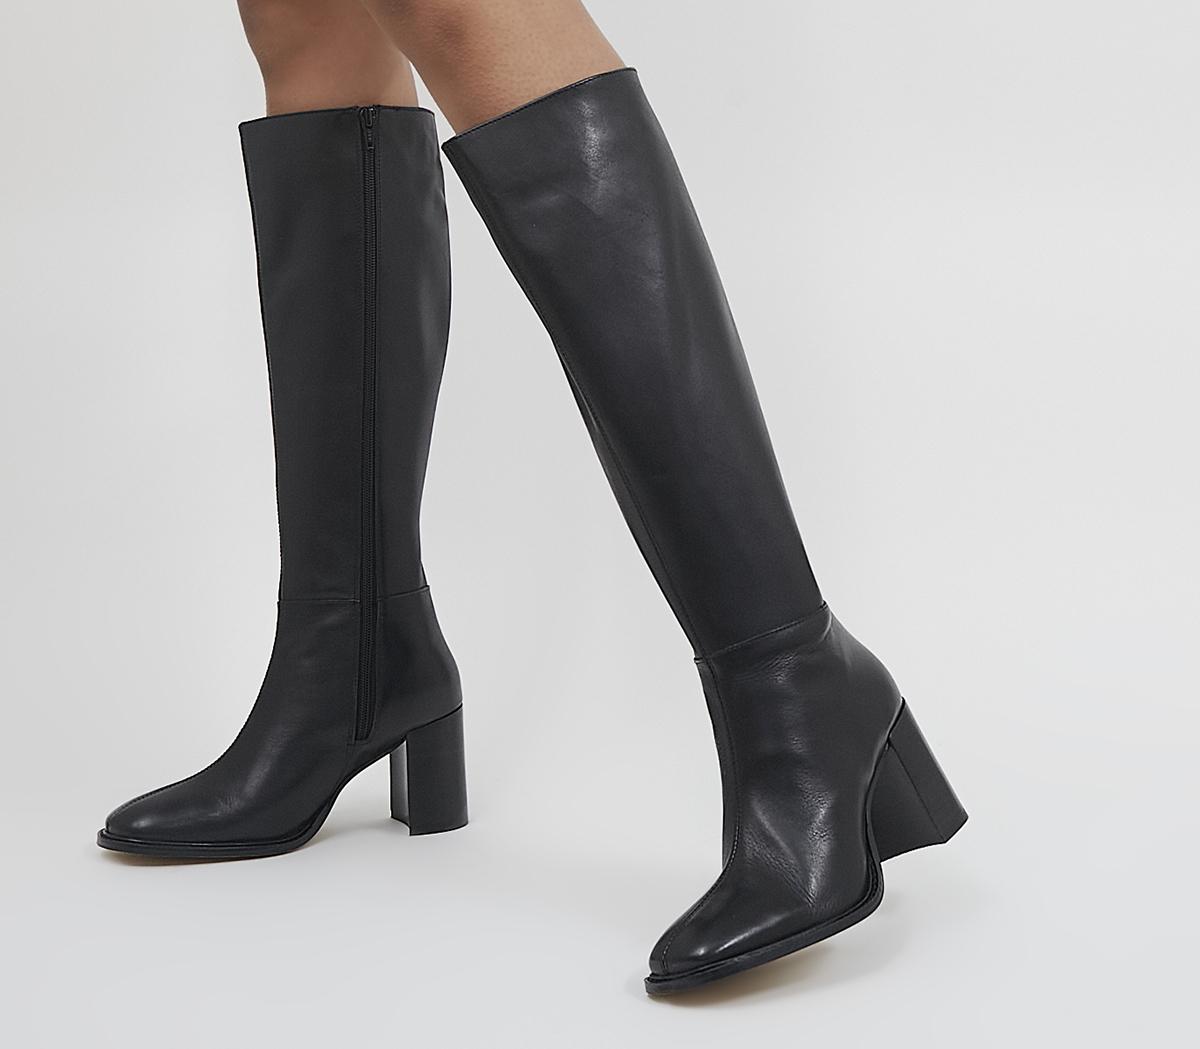 OFFICE Kennet Easy Smart Block Heel Boots Black Leather - Knee High Boots